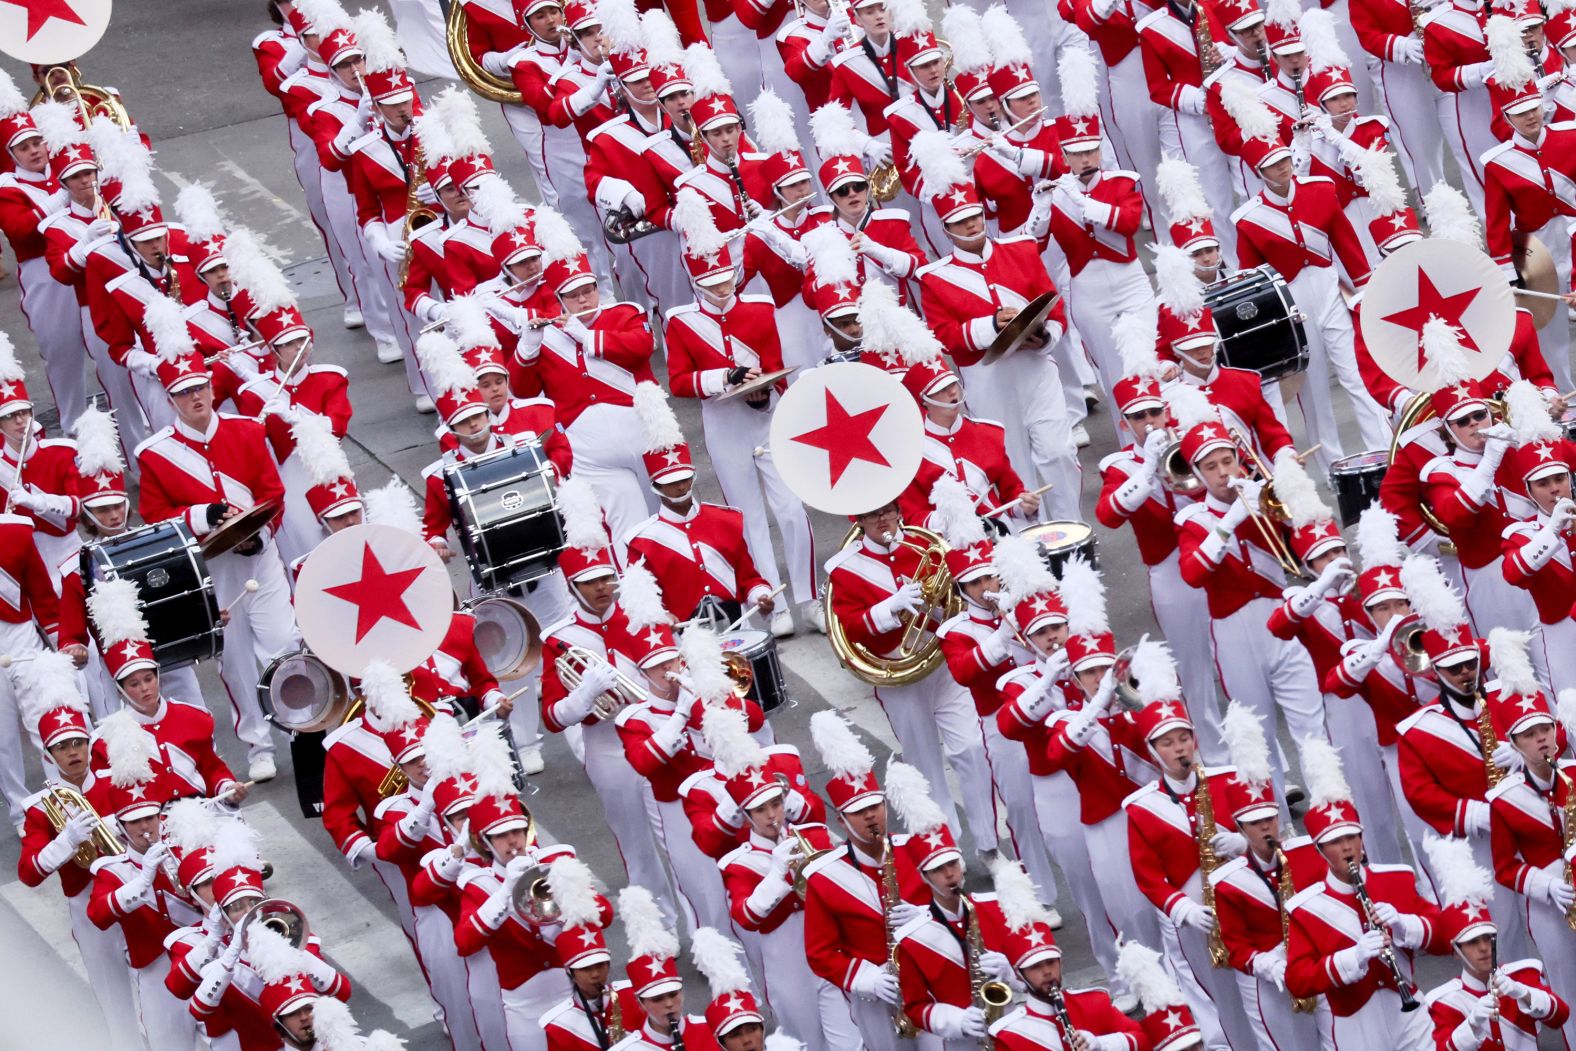 Macy's Great American Marching Band performs on Thursday.